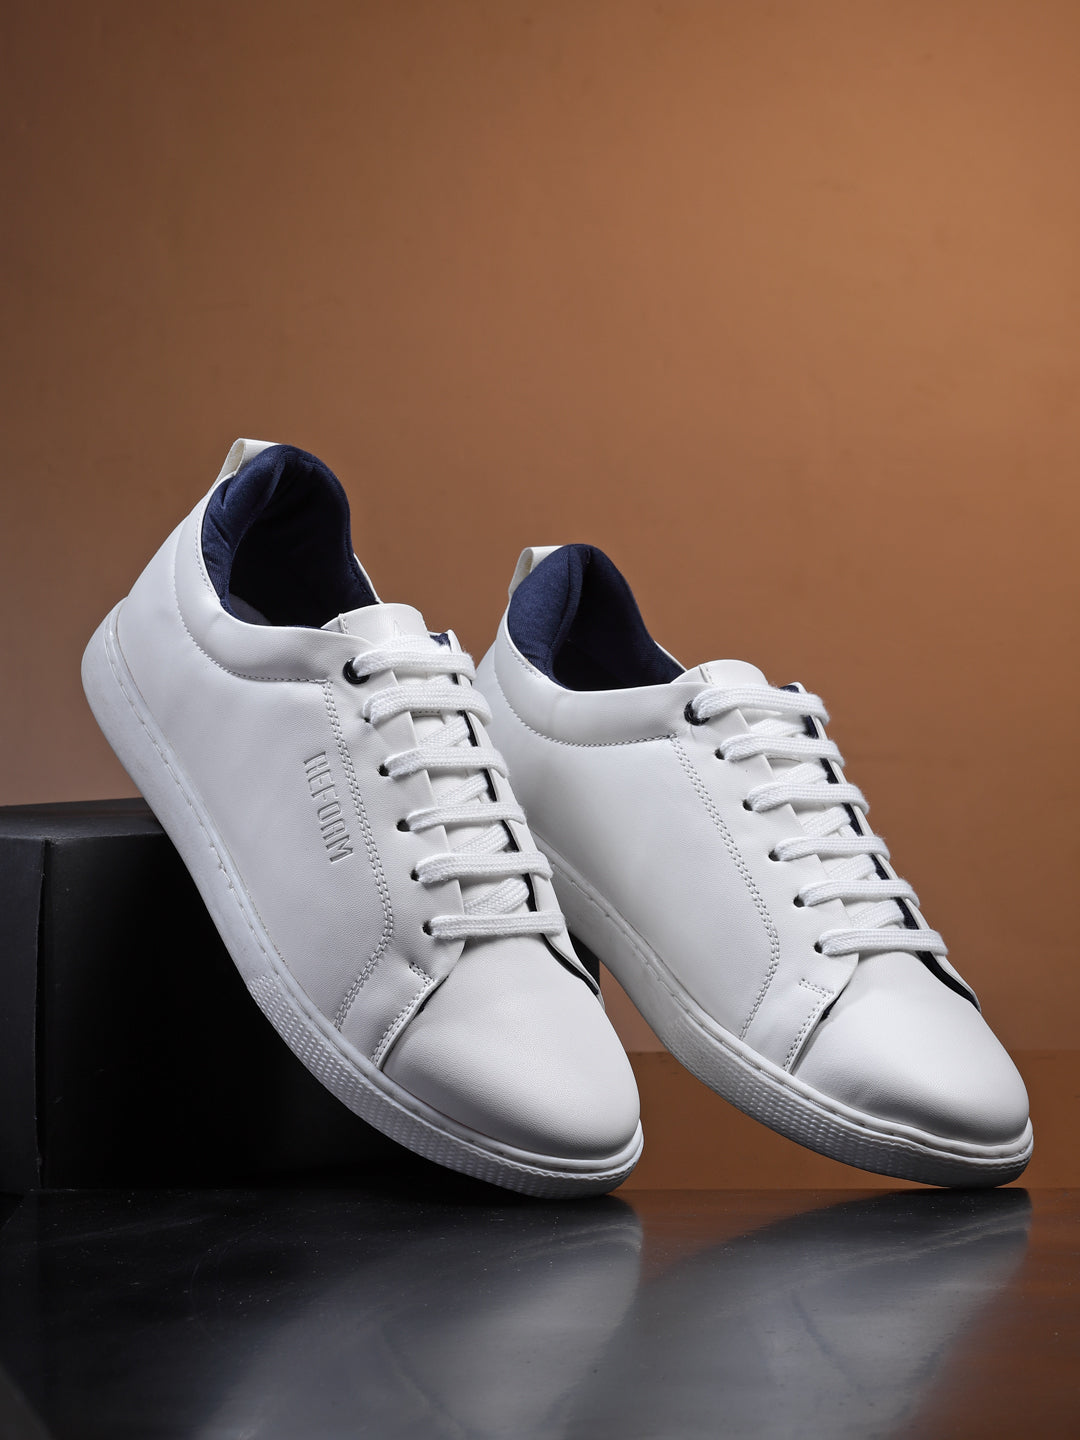 Plain white unisex Canvas Shoes at Rs 350/pair in Agra | ID: 22495248033